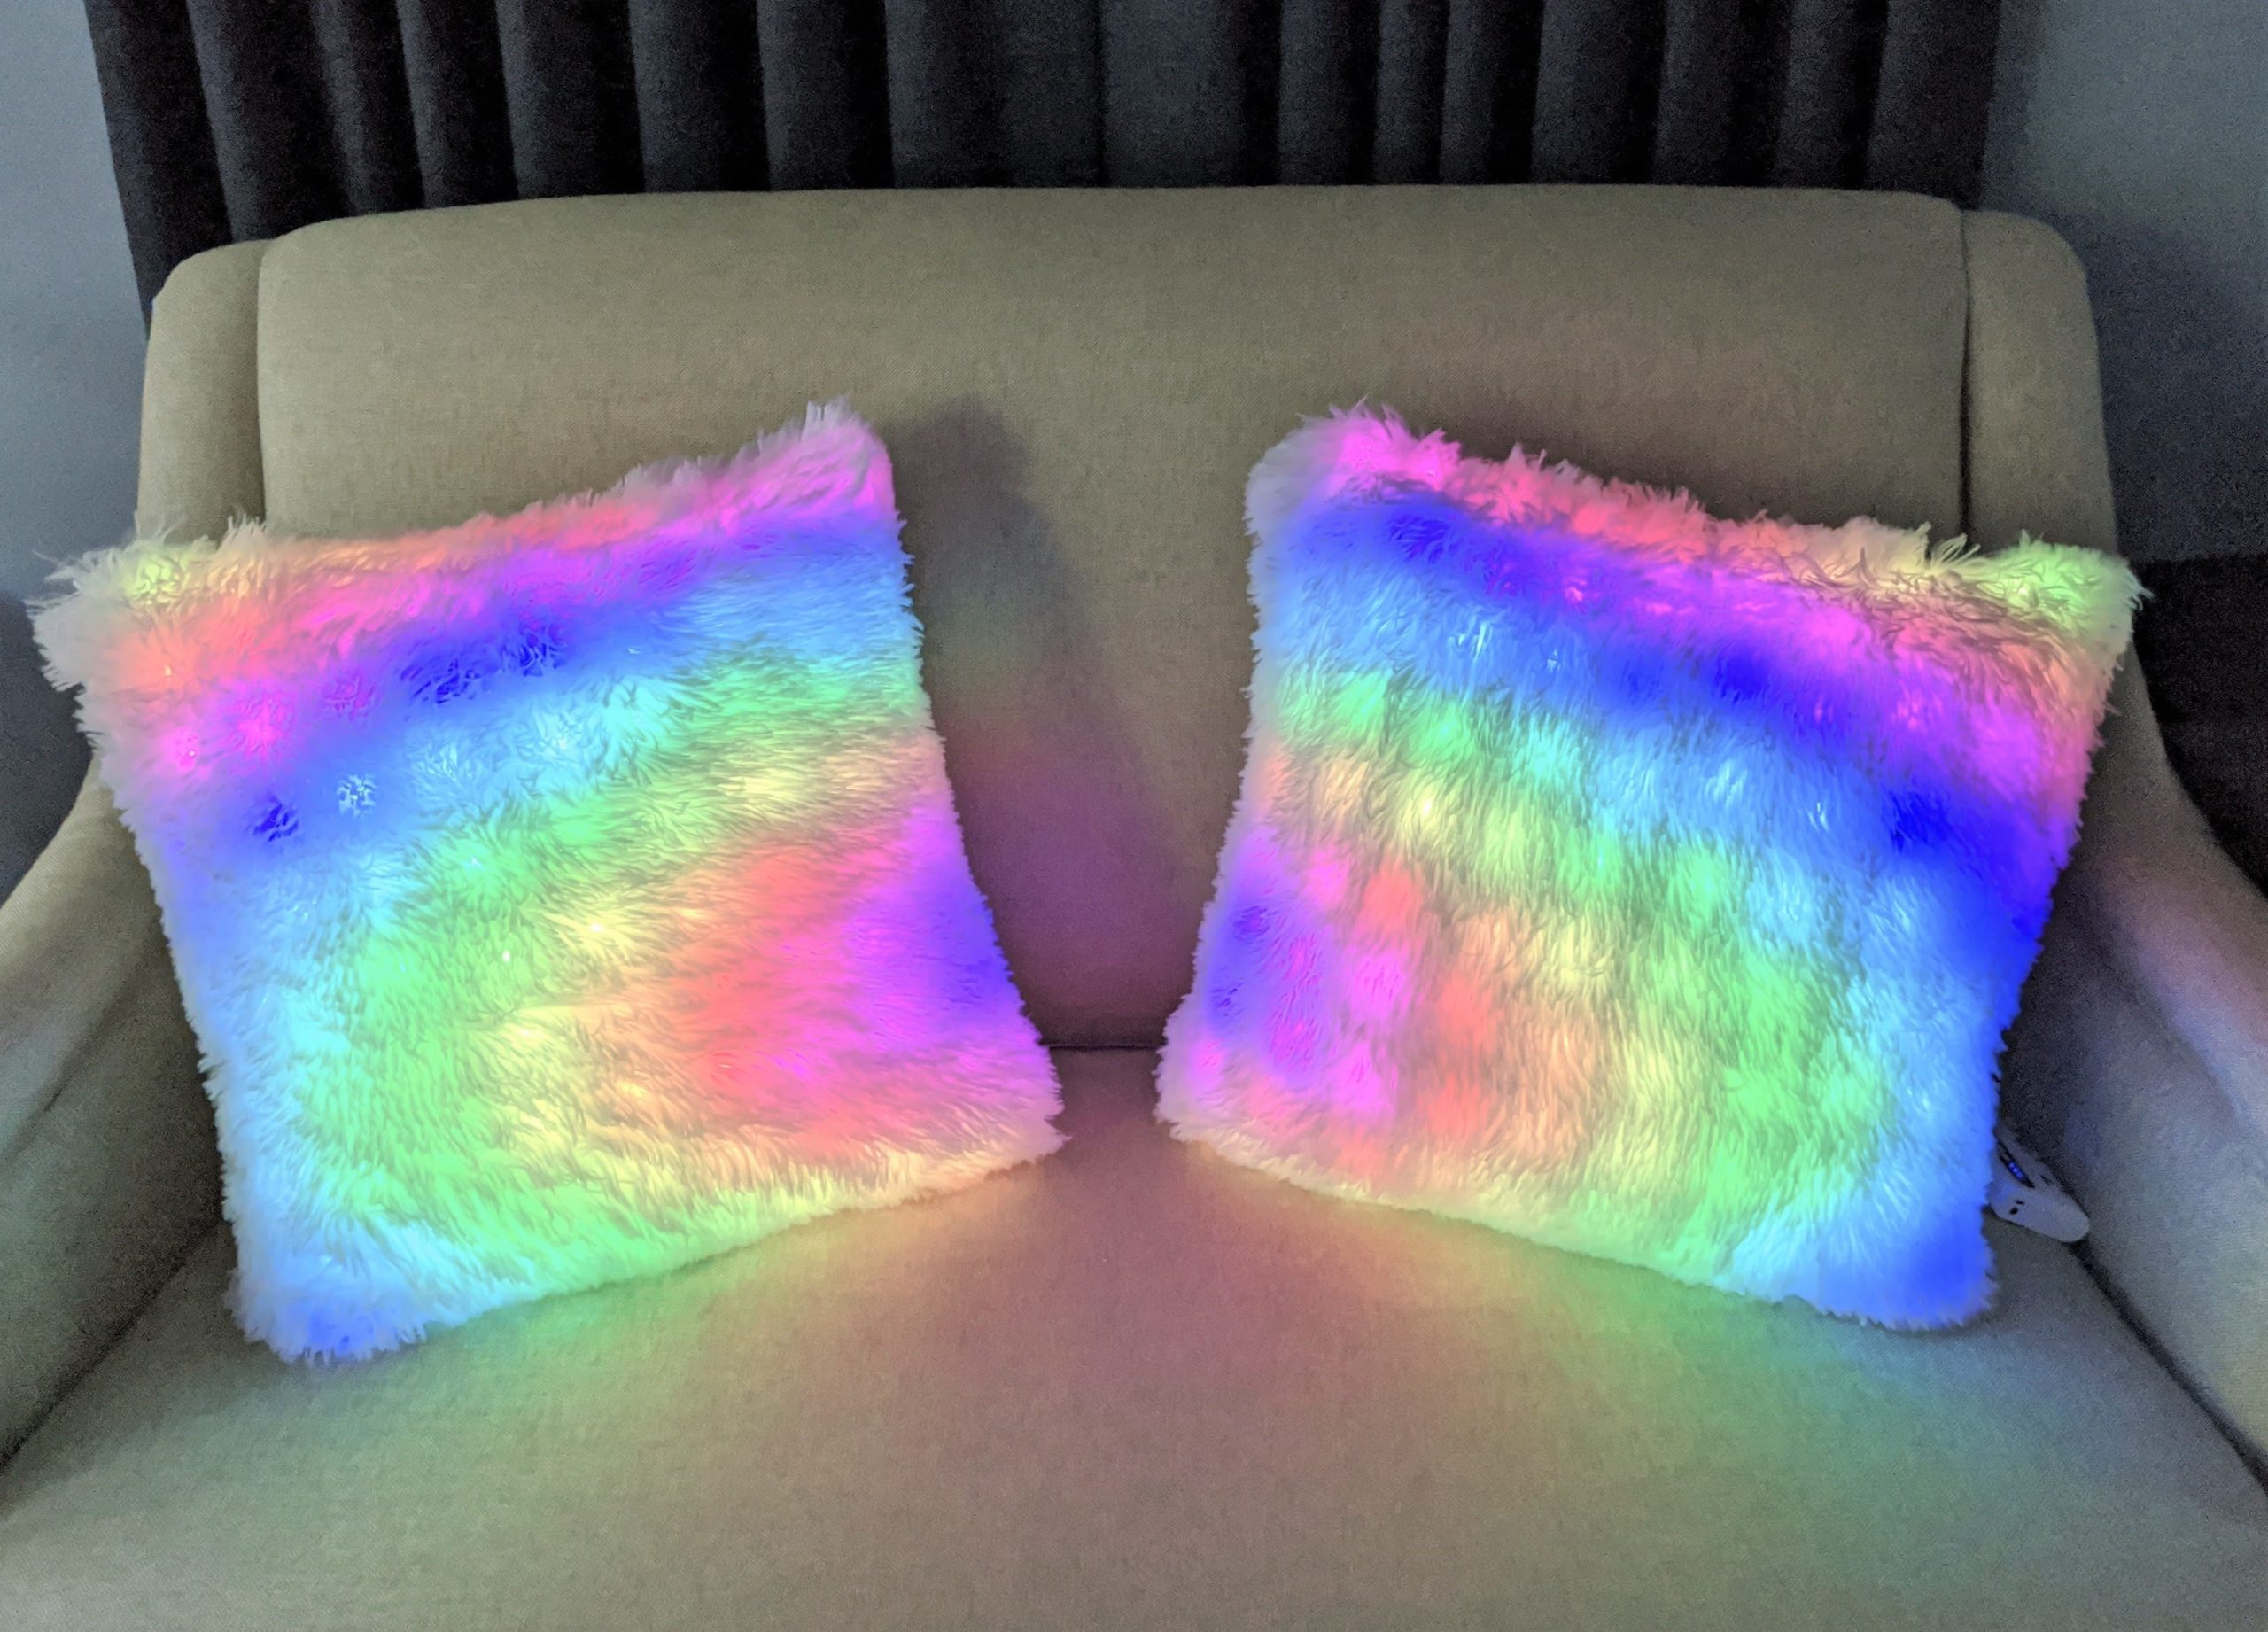 Pixelblaze Pillows: Light Up Your Upholstery With LEDs